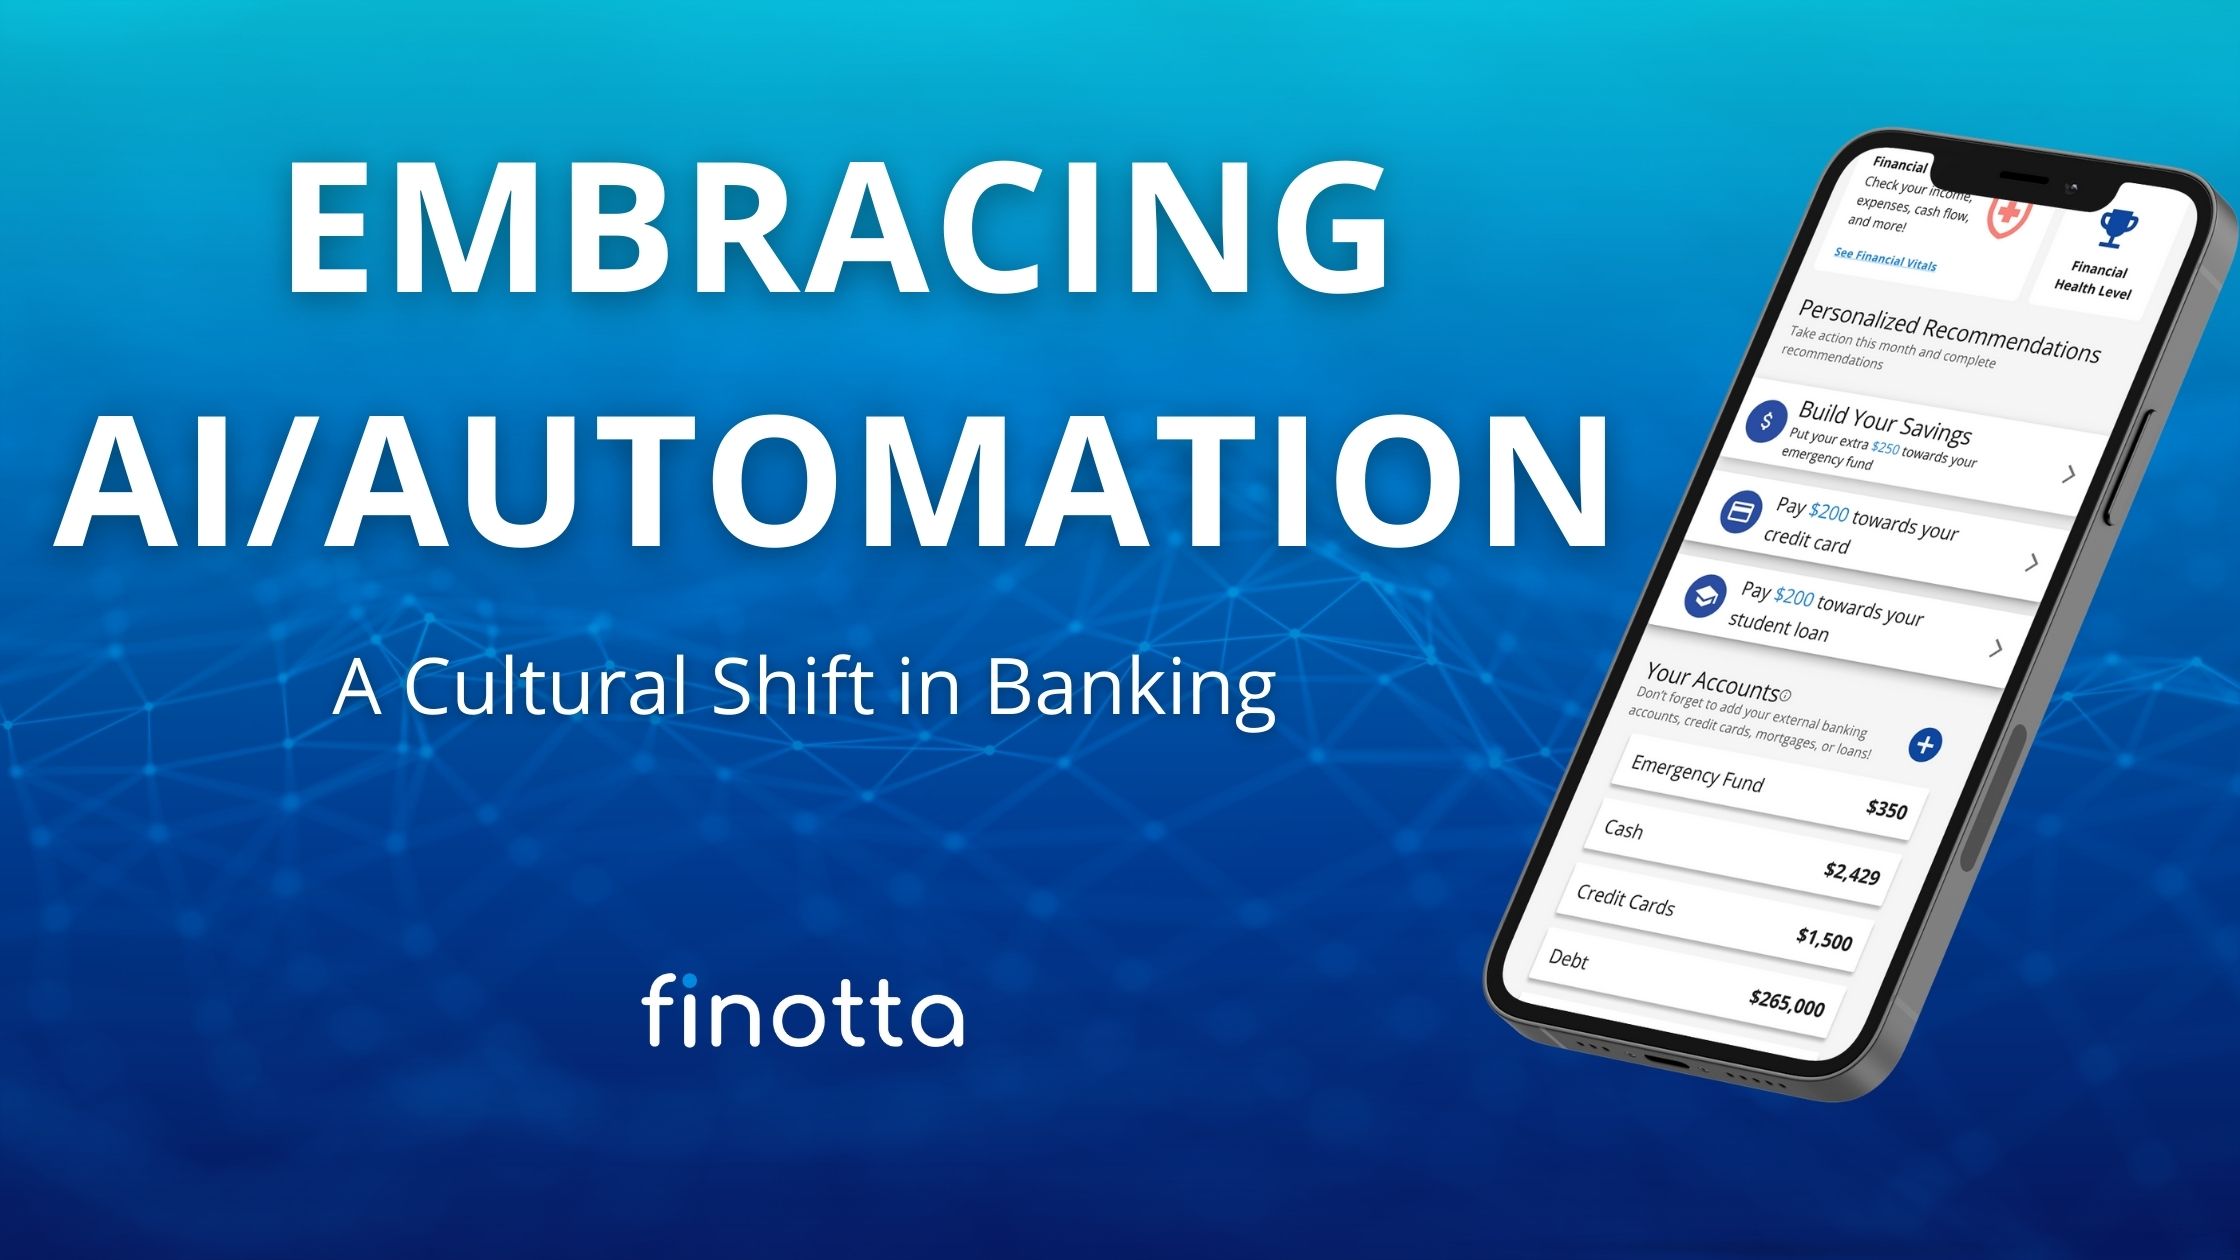 Embracing AI/Automation: A Cultural Shift in Banking